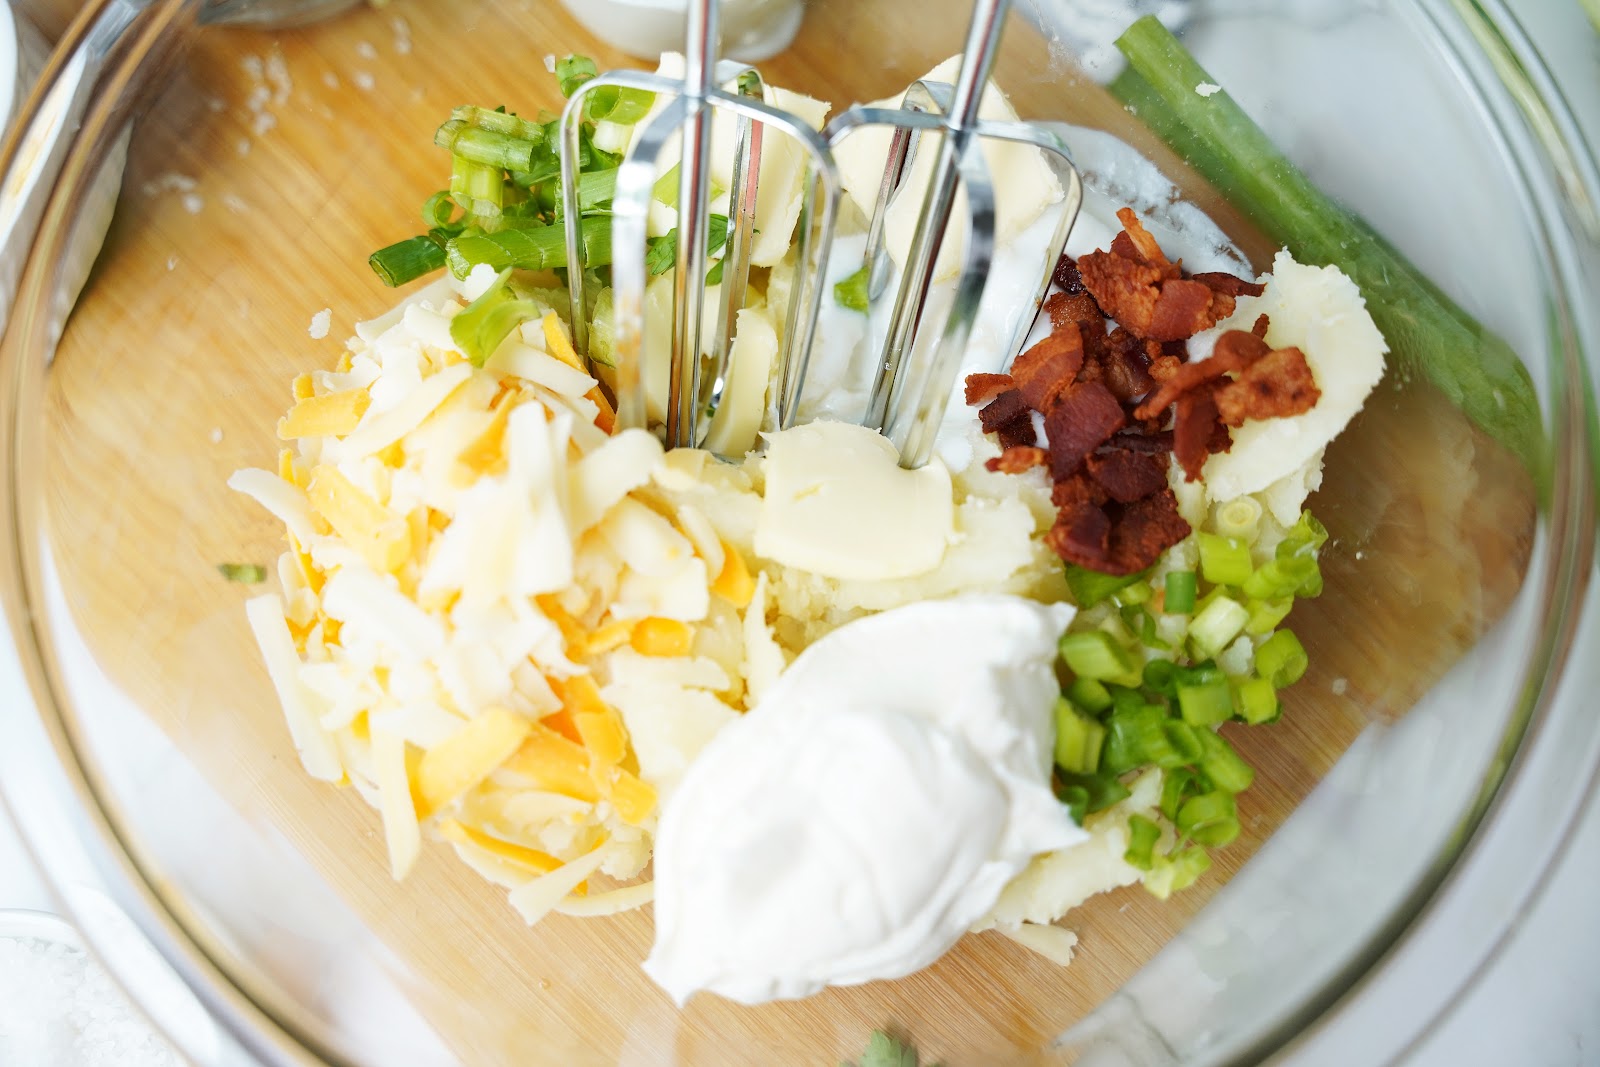 Mix filling ingredients with a hand mixer in a medium bowl.